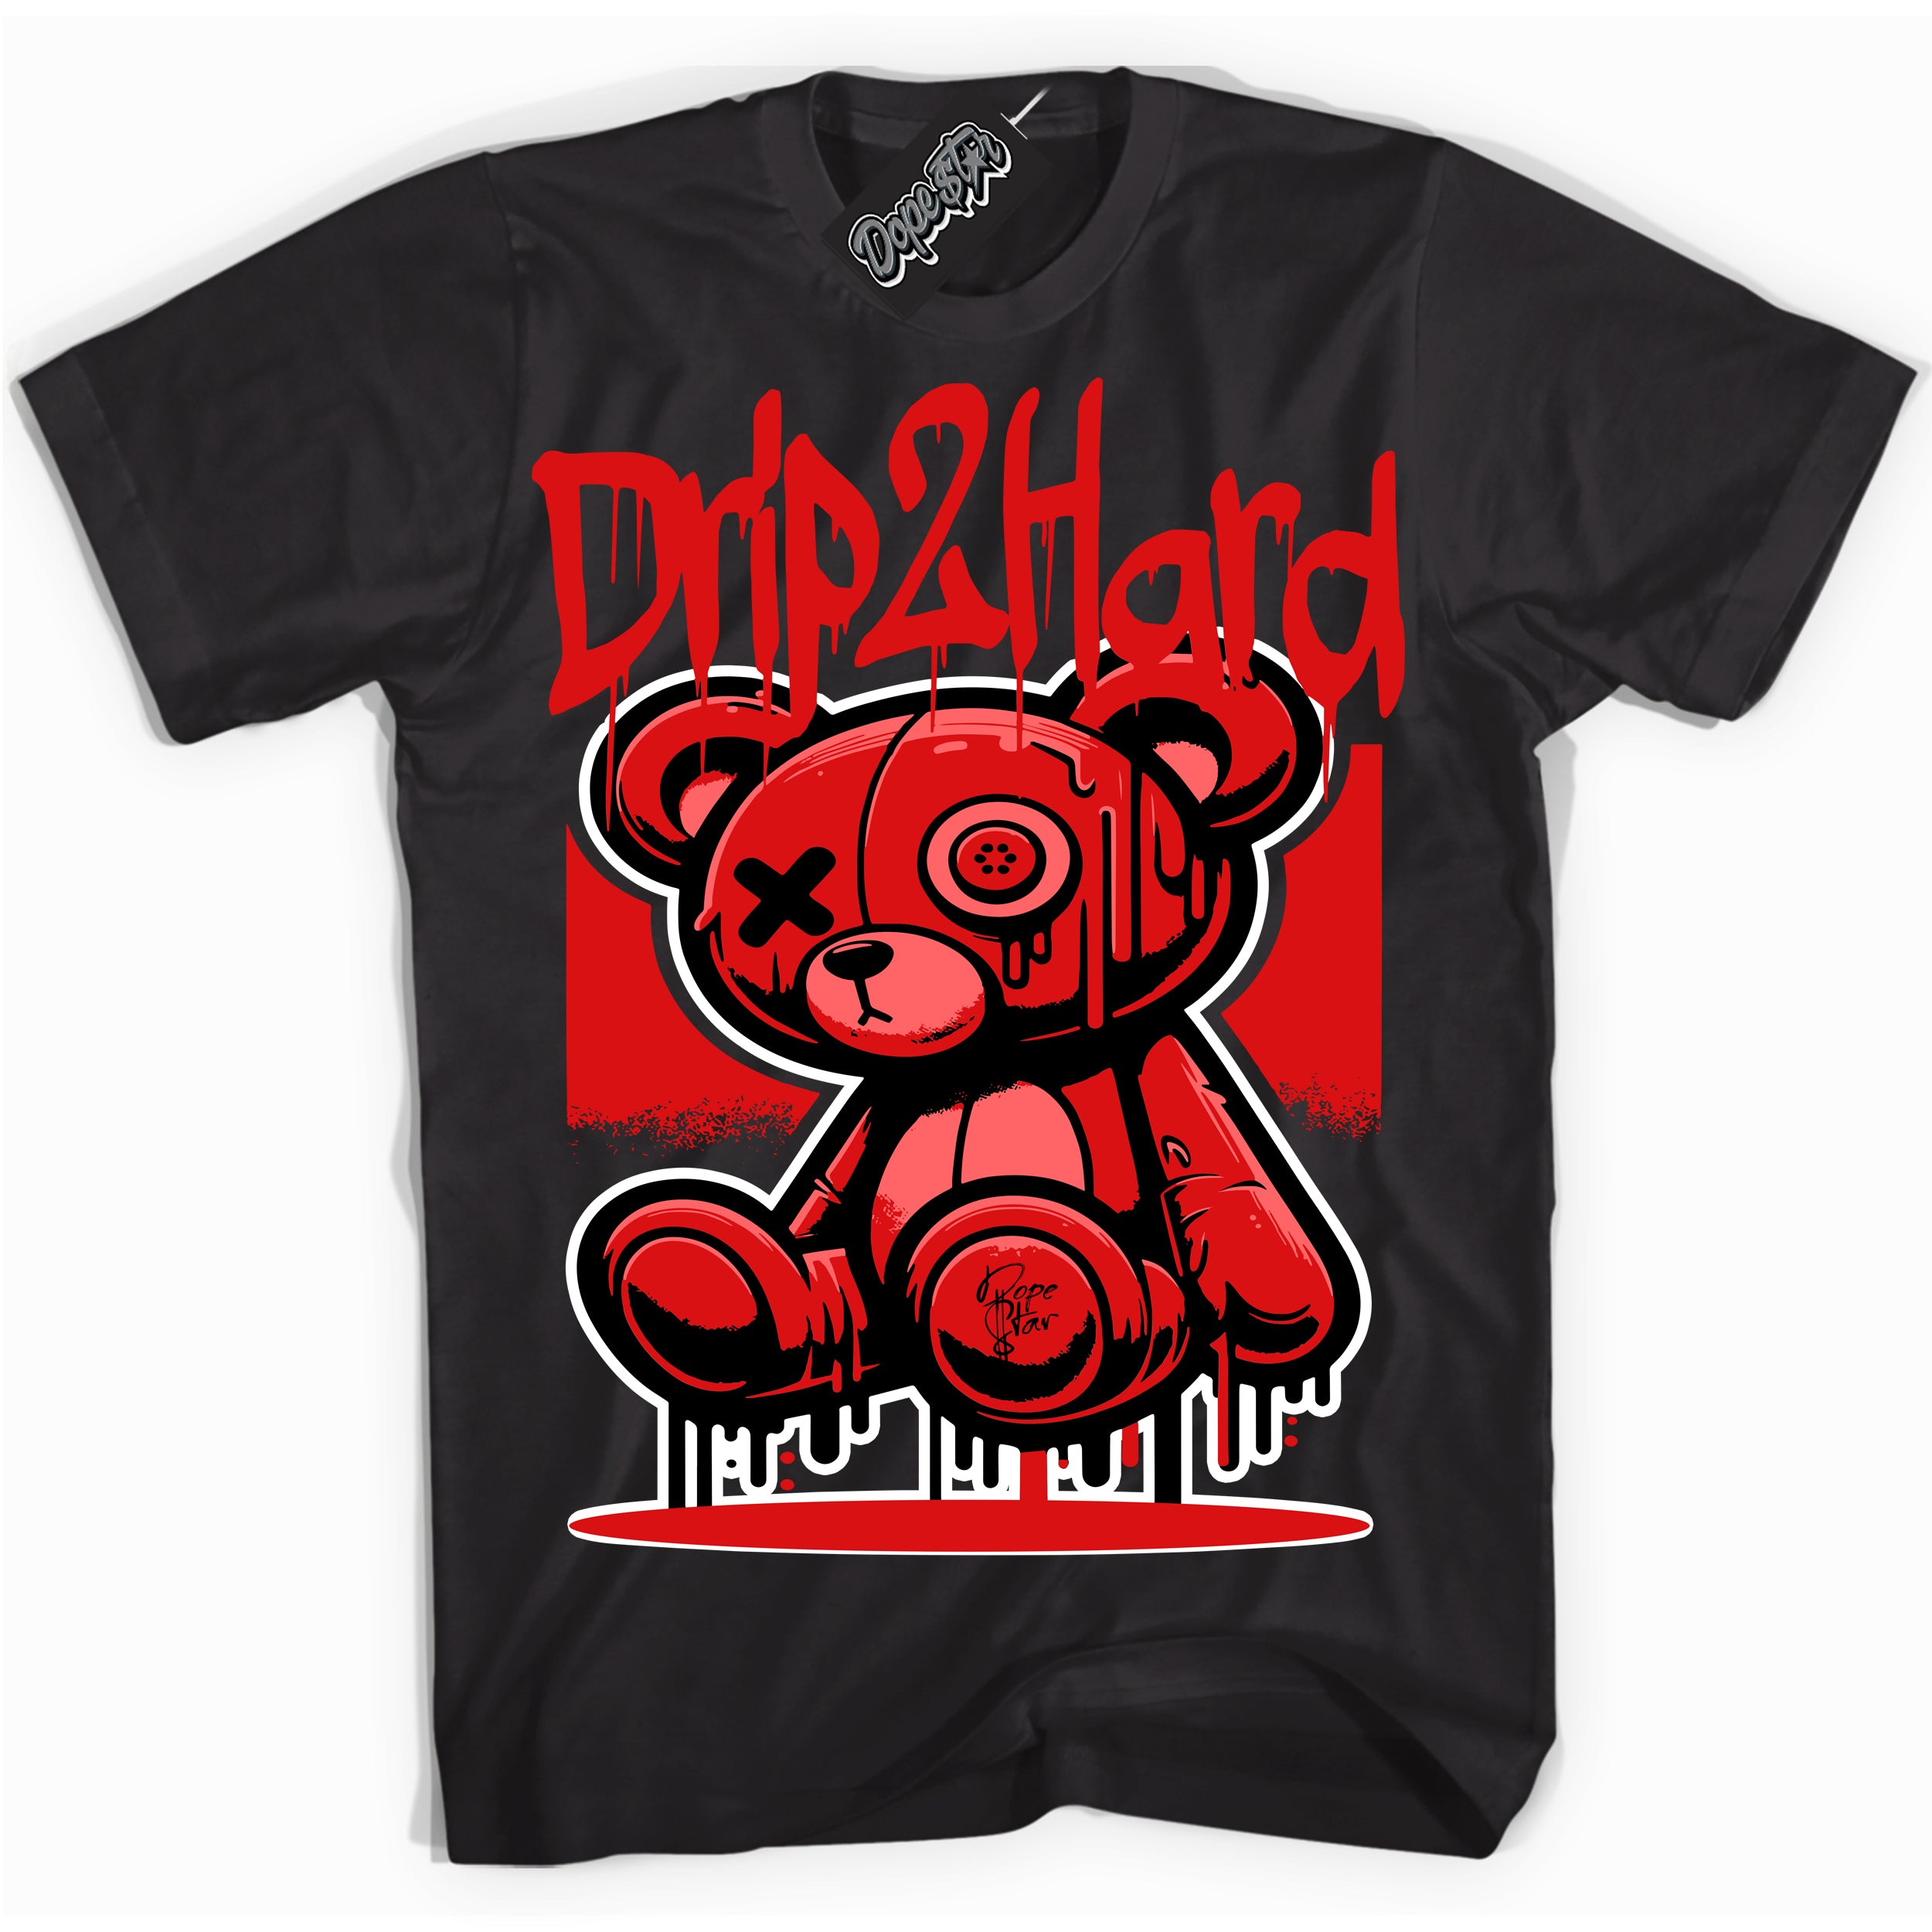 Cool Black graphic tee with “ Drip 2 Hard ” design, that perfectly matches Chile Red 9s